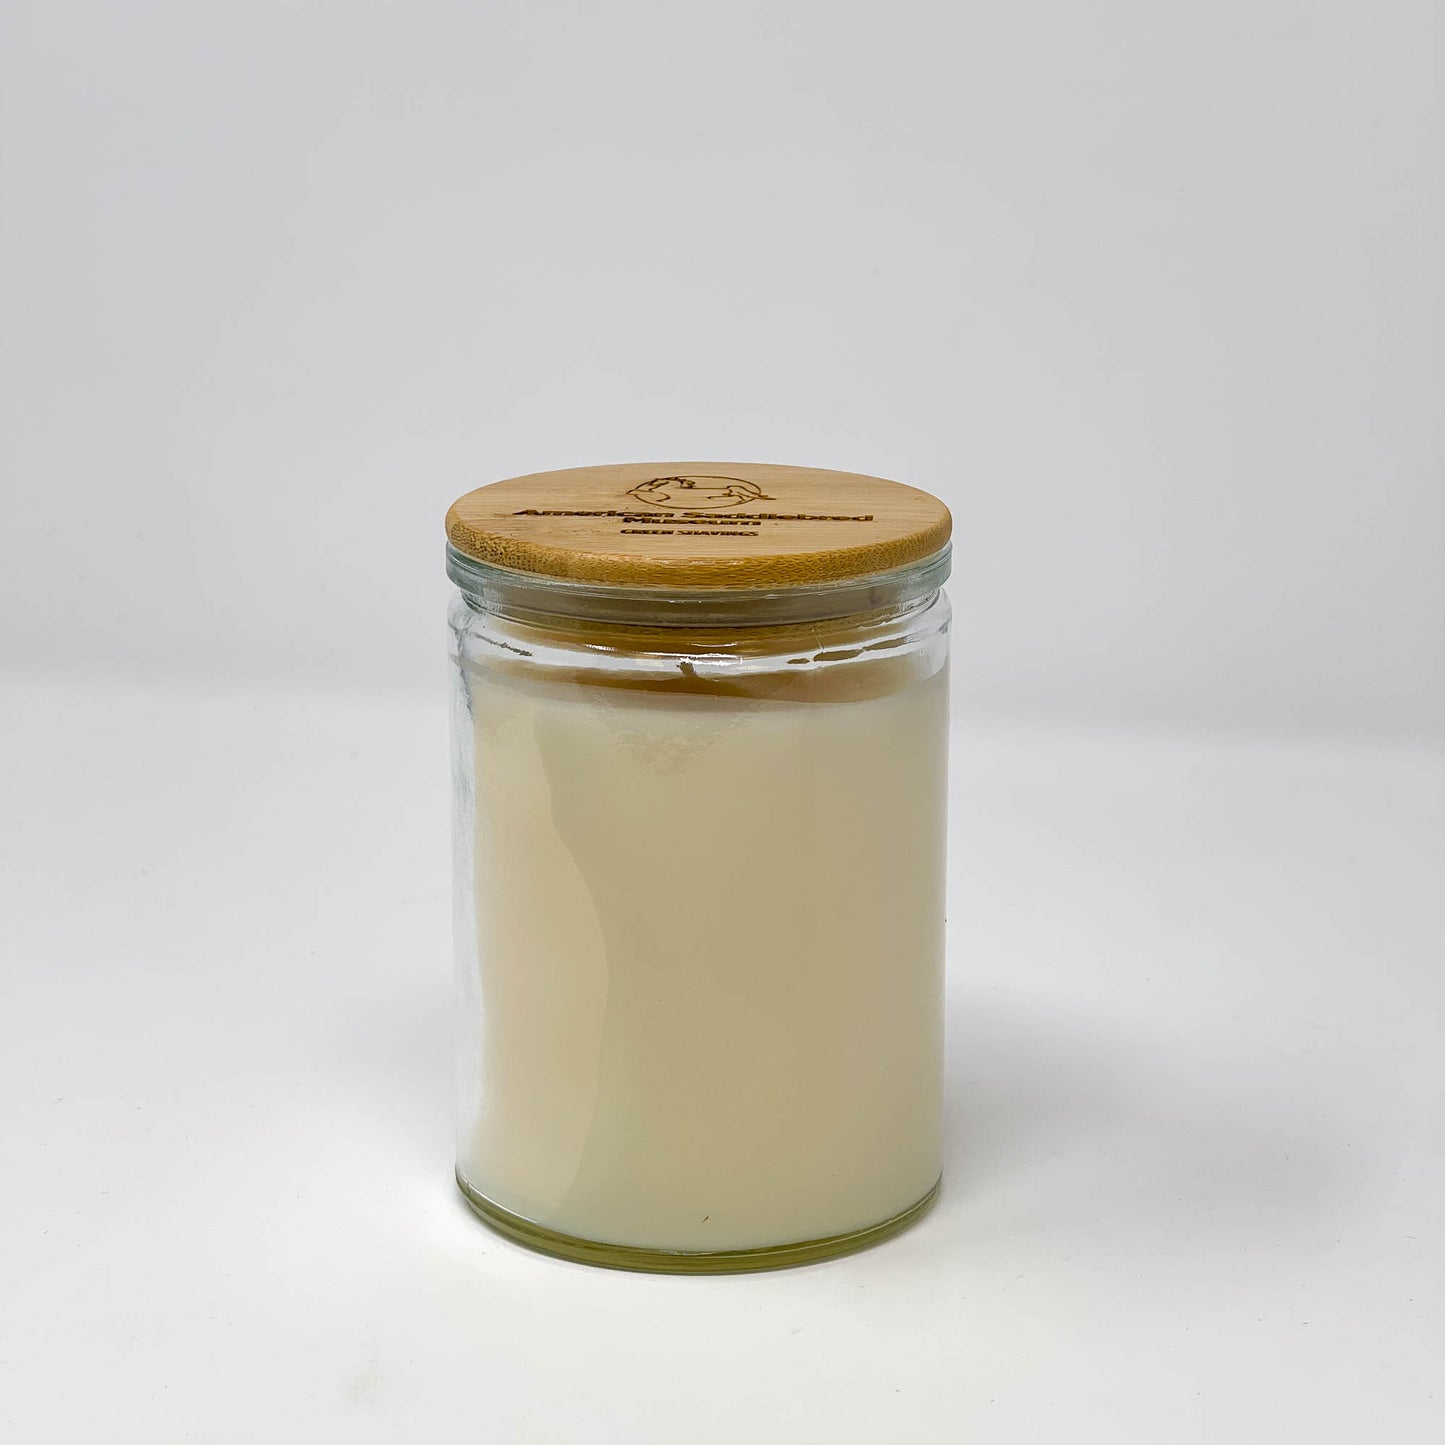 Hand-Poured Candle: Show Ready